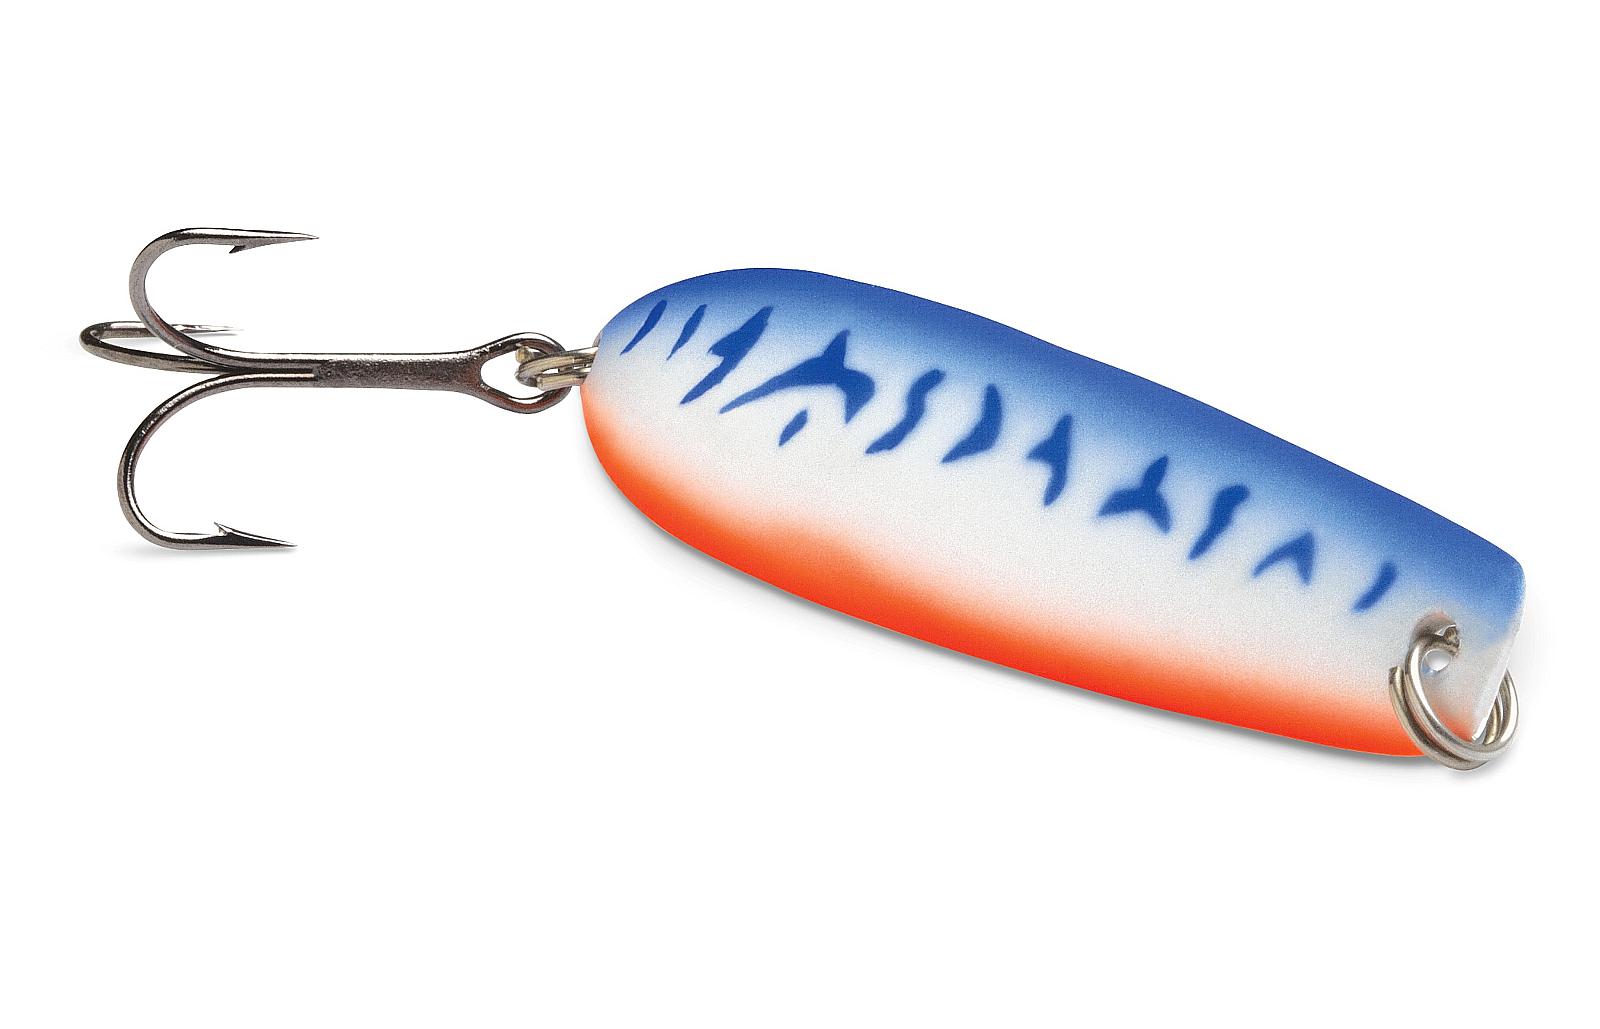 Luhr-Jensen introduces new Laxee Spoon - Major League Fishing